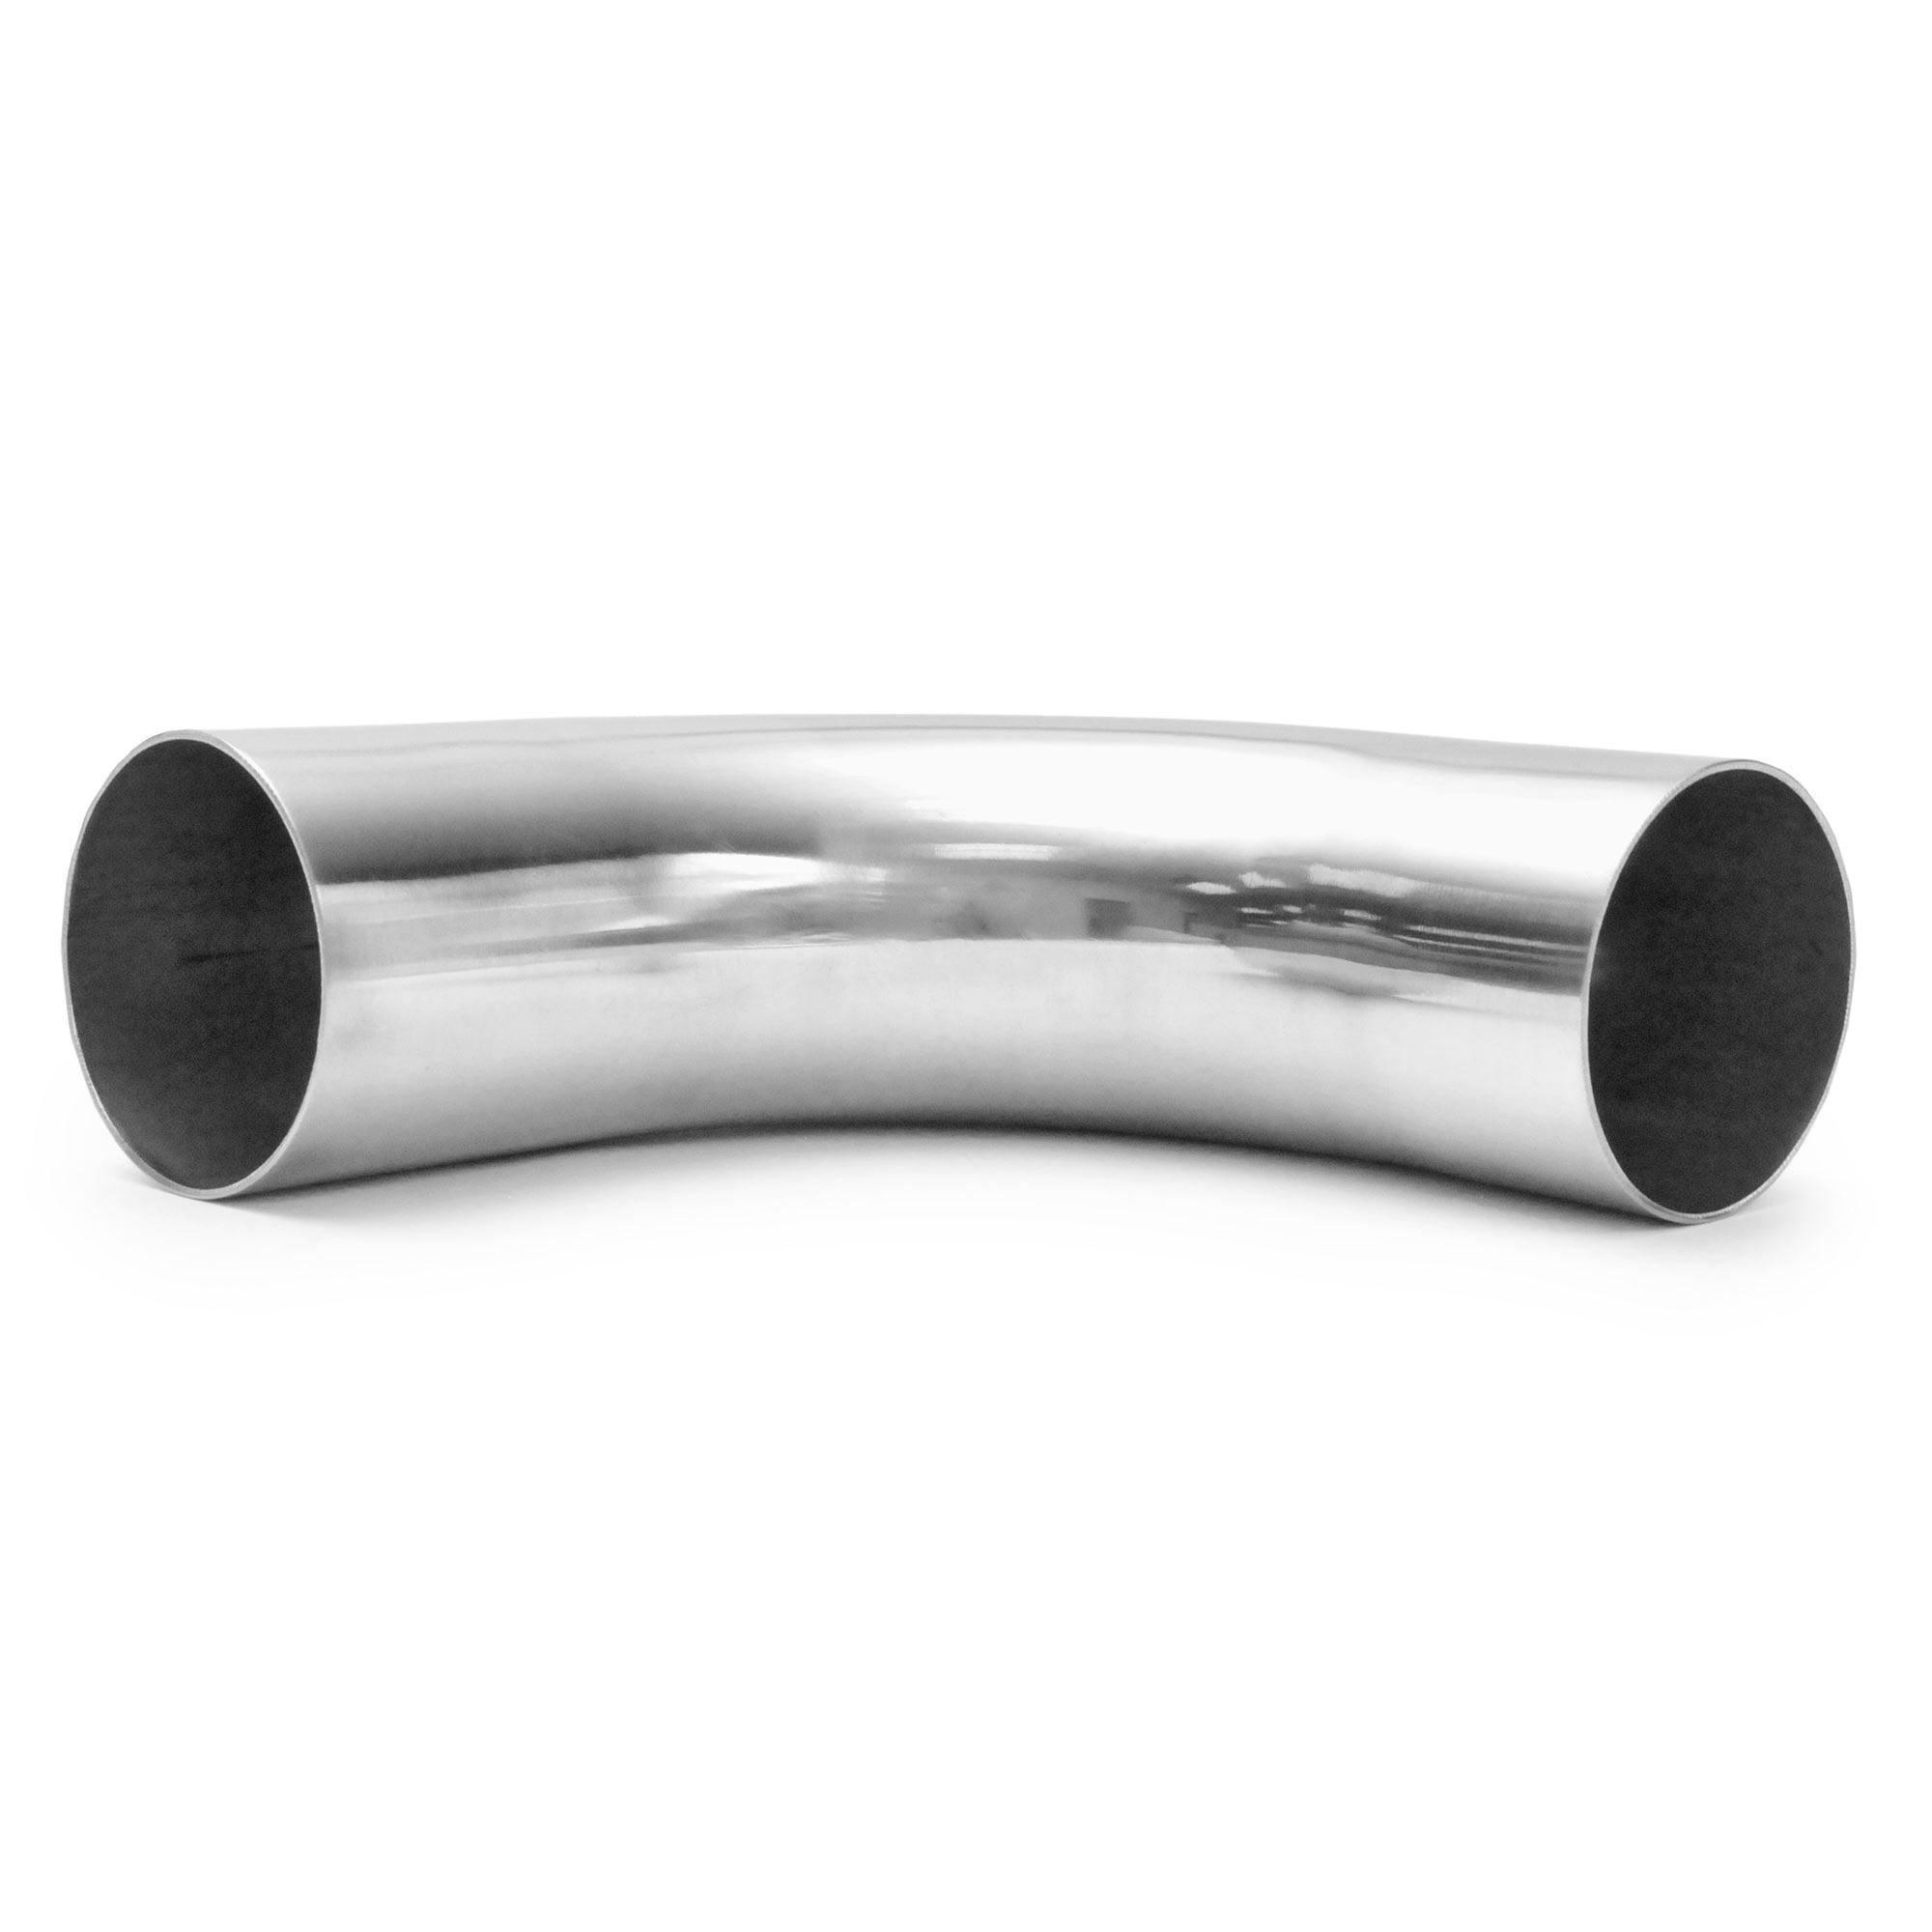 Mandrel Bend Pipe Tubing Tube 2.125 90 Degree For Intercoolers Exhaust & More